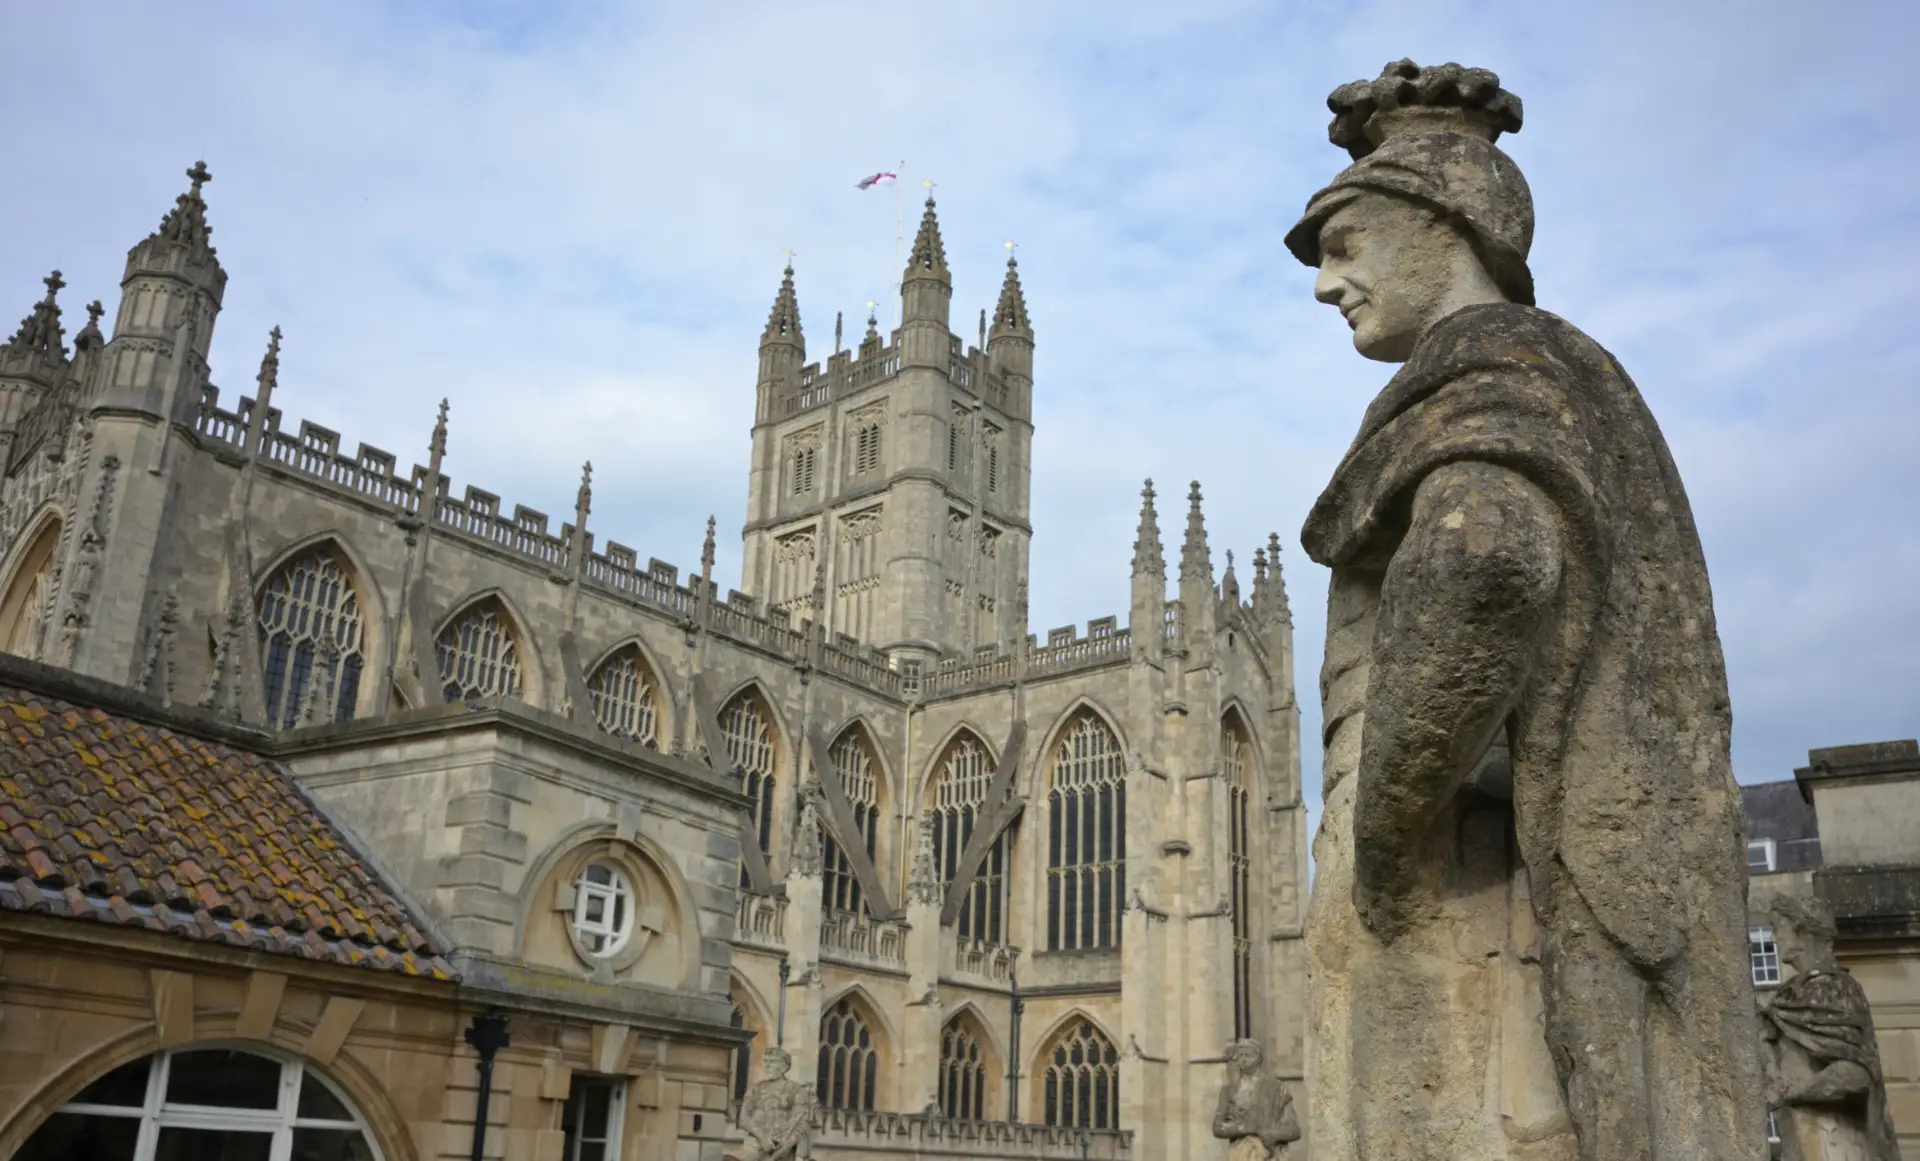 A stone statue of a historical figure in the foreground with the ornate architecture of a gothic cathedral, featuring spires and intricate facade details, in the background under a cloudy sky.